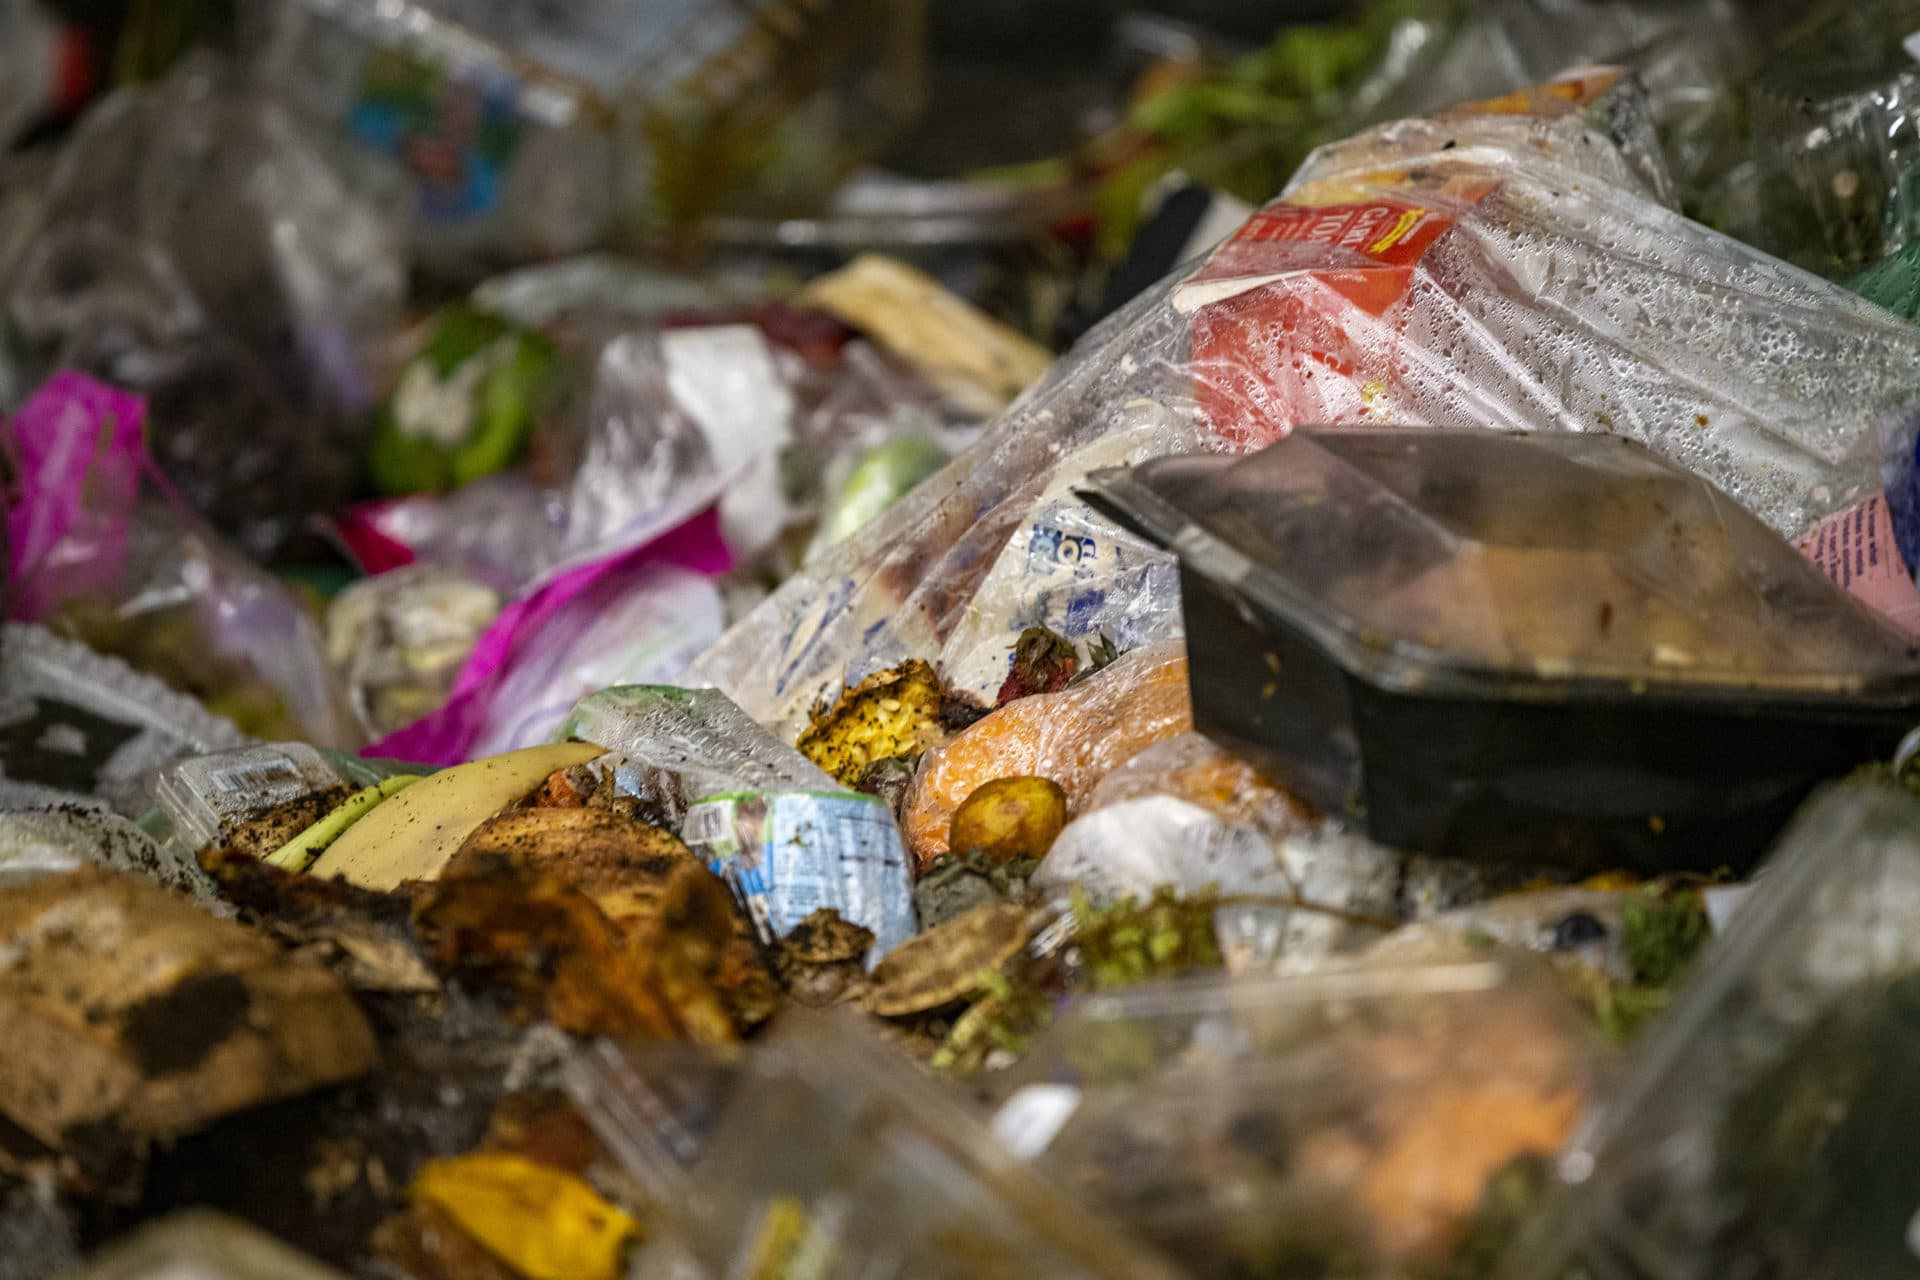 Food waste to be processed at the Vanguard Renewables Organics Recycling Facility in Agawam. (Jesse Costa/WBUR)